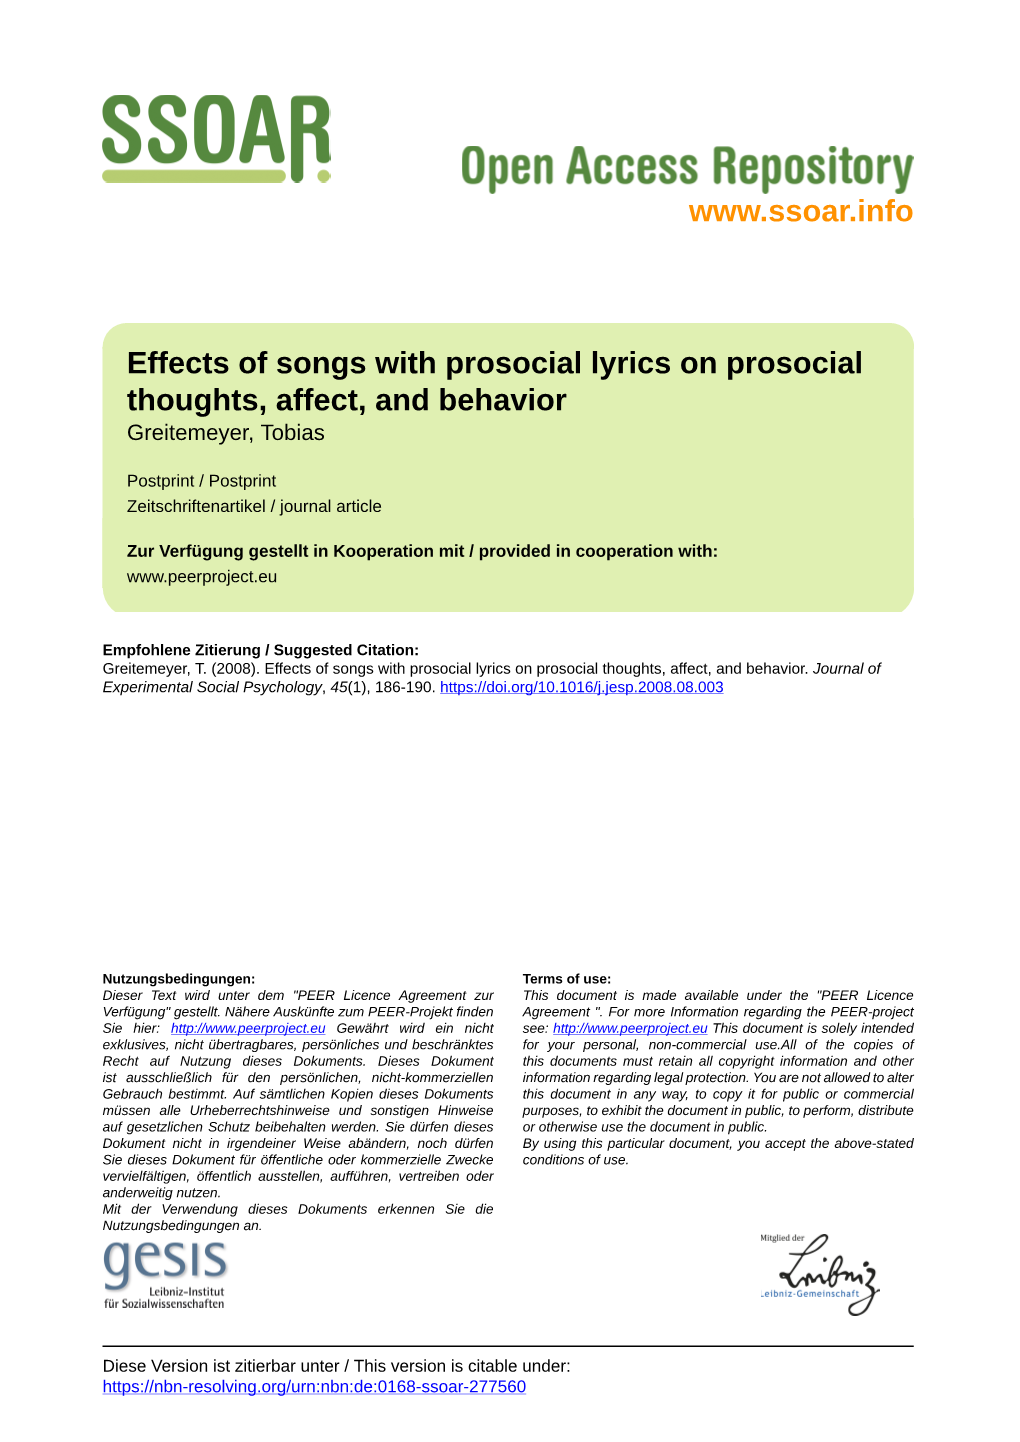 Effects of Songs with Prosocial Lyrics on Prosocial Thoughts, Affect, and Behavior Greitemeyer, Tobias